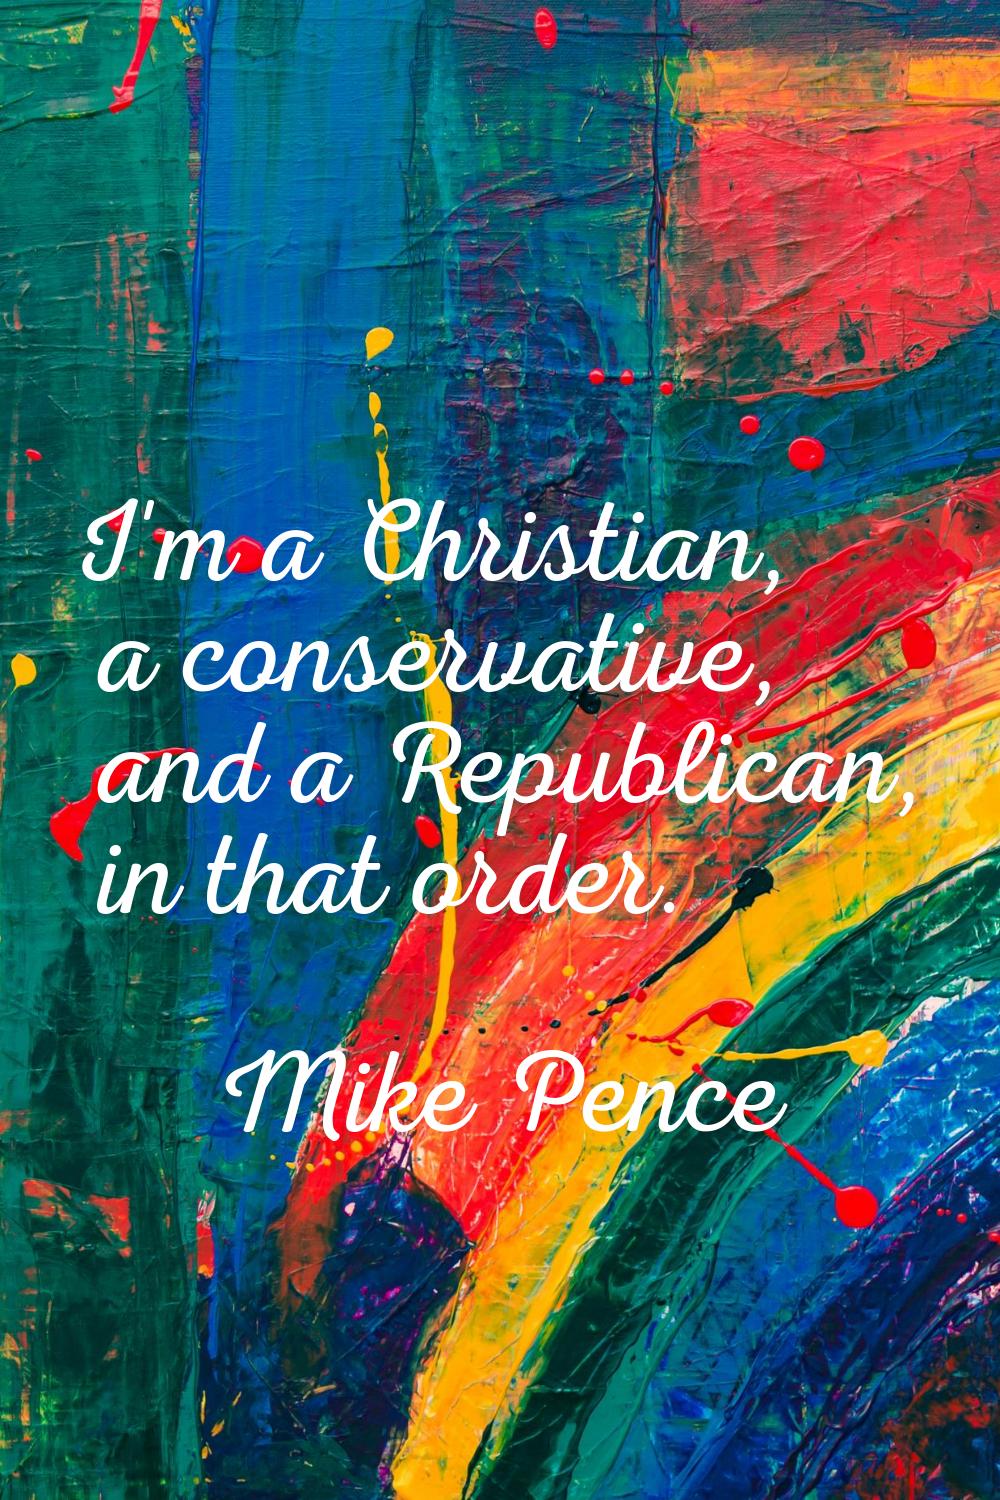 I'm a Christian, a conservative, and a Republican, in that order.